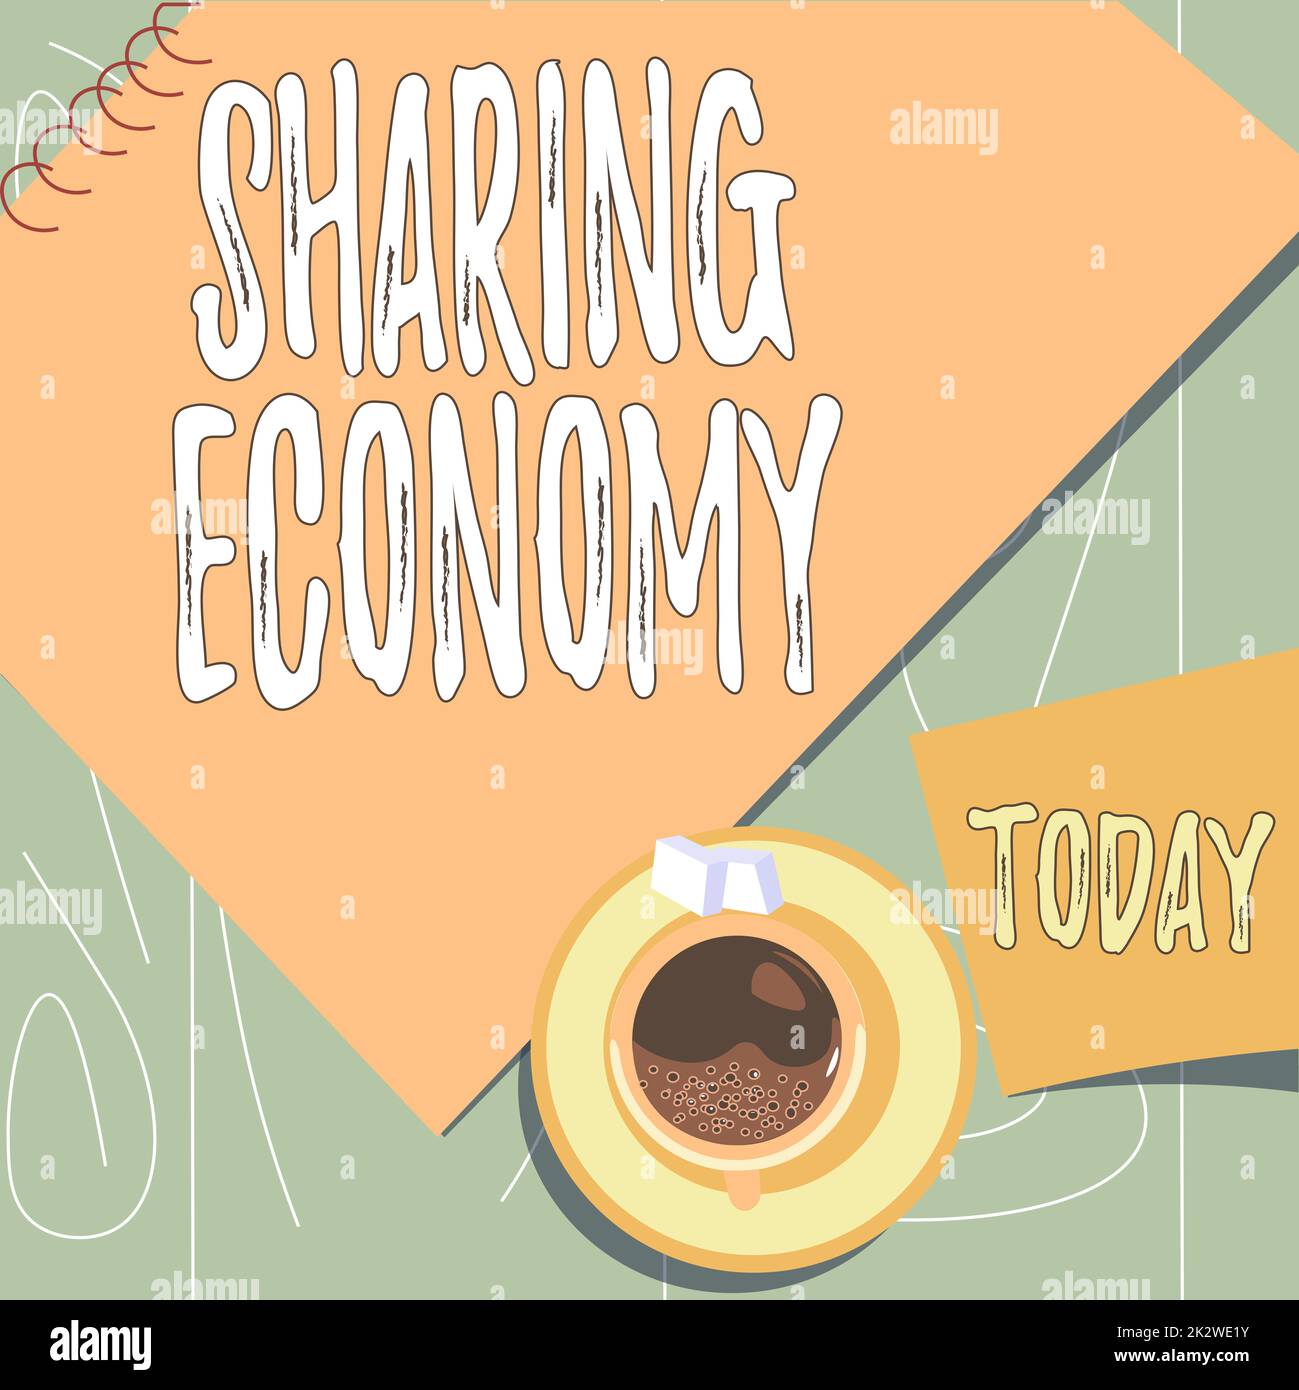 Sign displaying Sharing Economy. Business idea economic model based on providing access to goods offee cup sitting on desk with notebook representing relaxed working space. Stock Photo